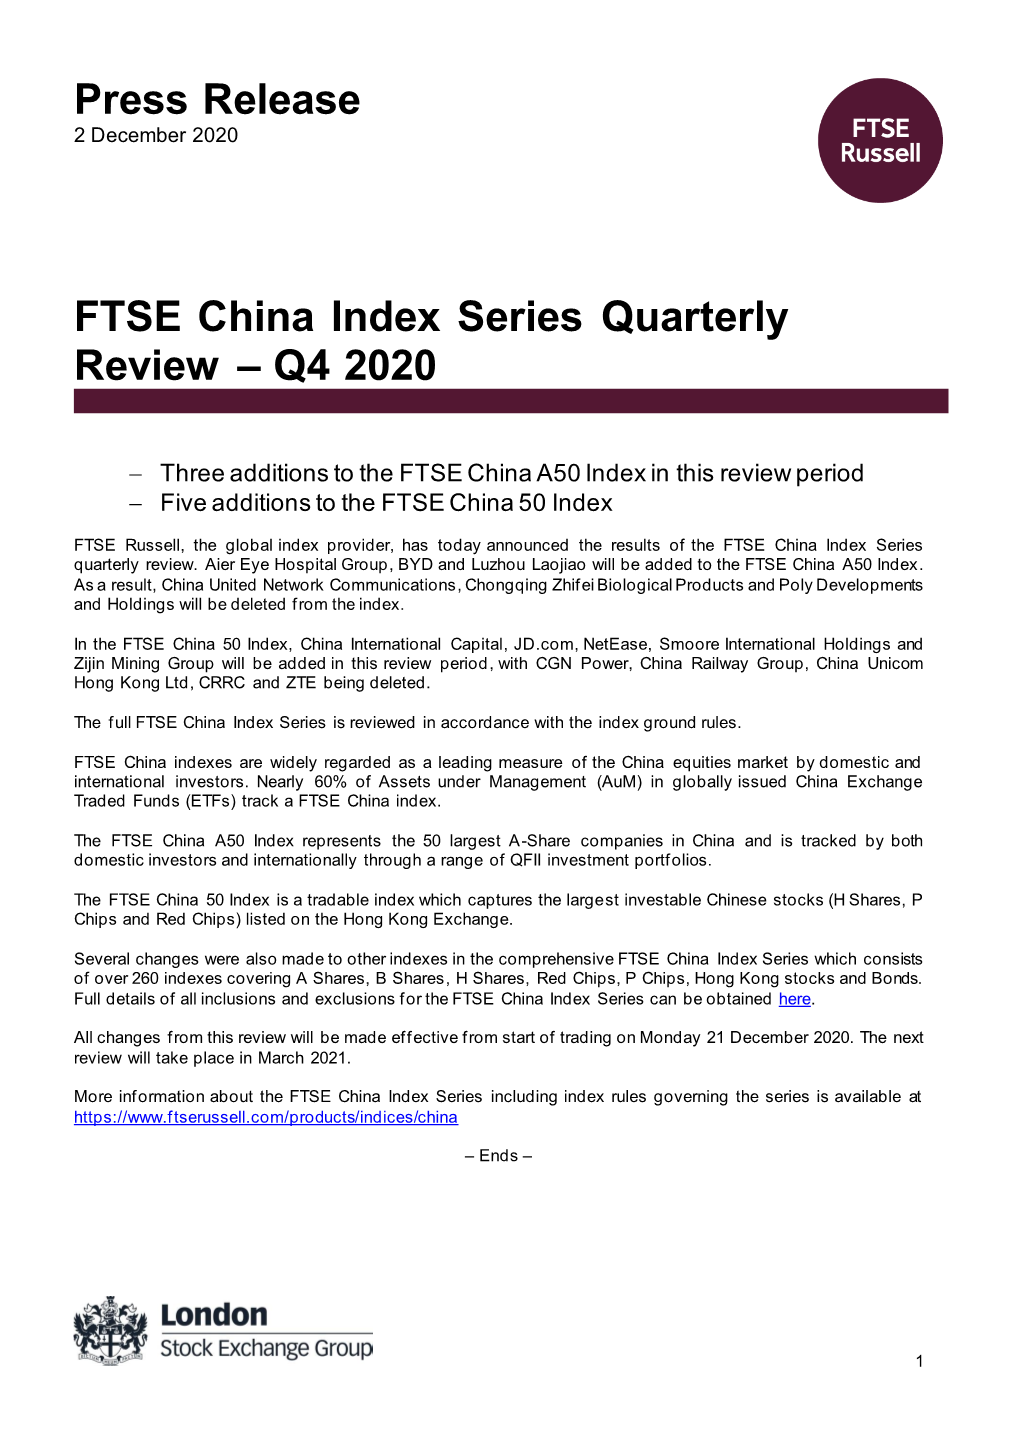 FTSE China Index Series Quarterly Review – Q4 2020